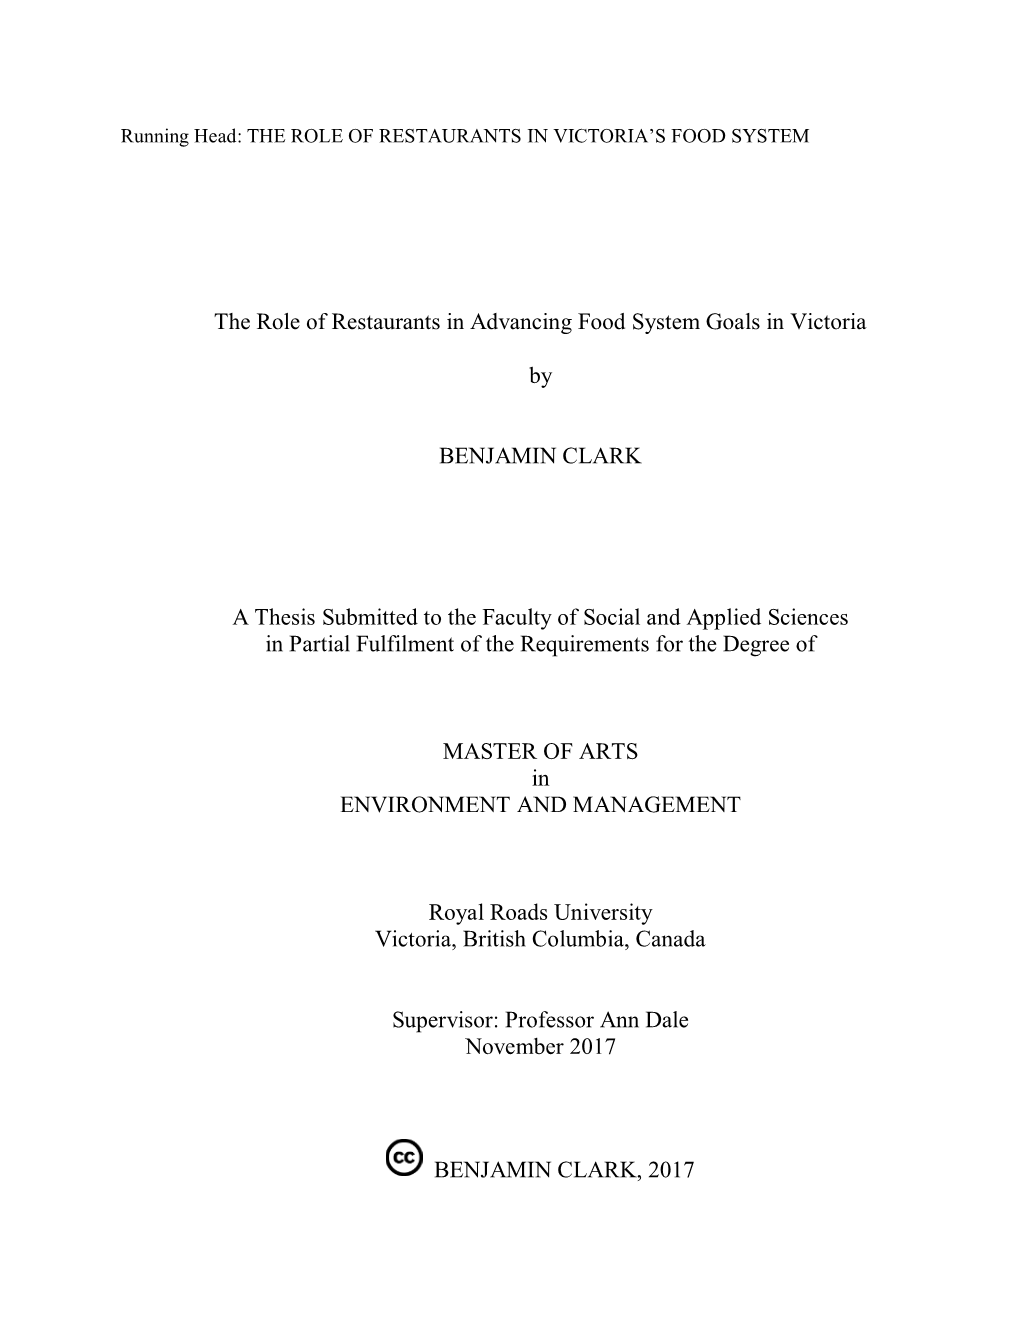 The Role of Restaurants in Advancing Food System Goals in Victoria By